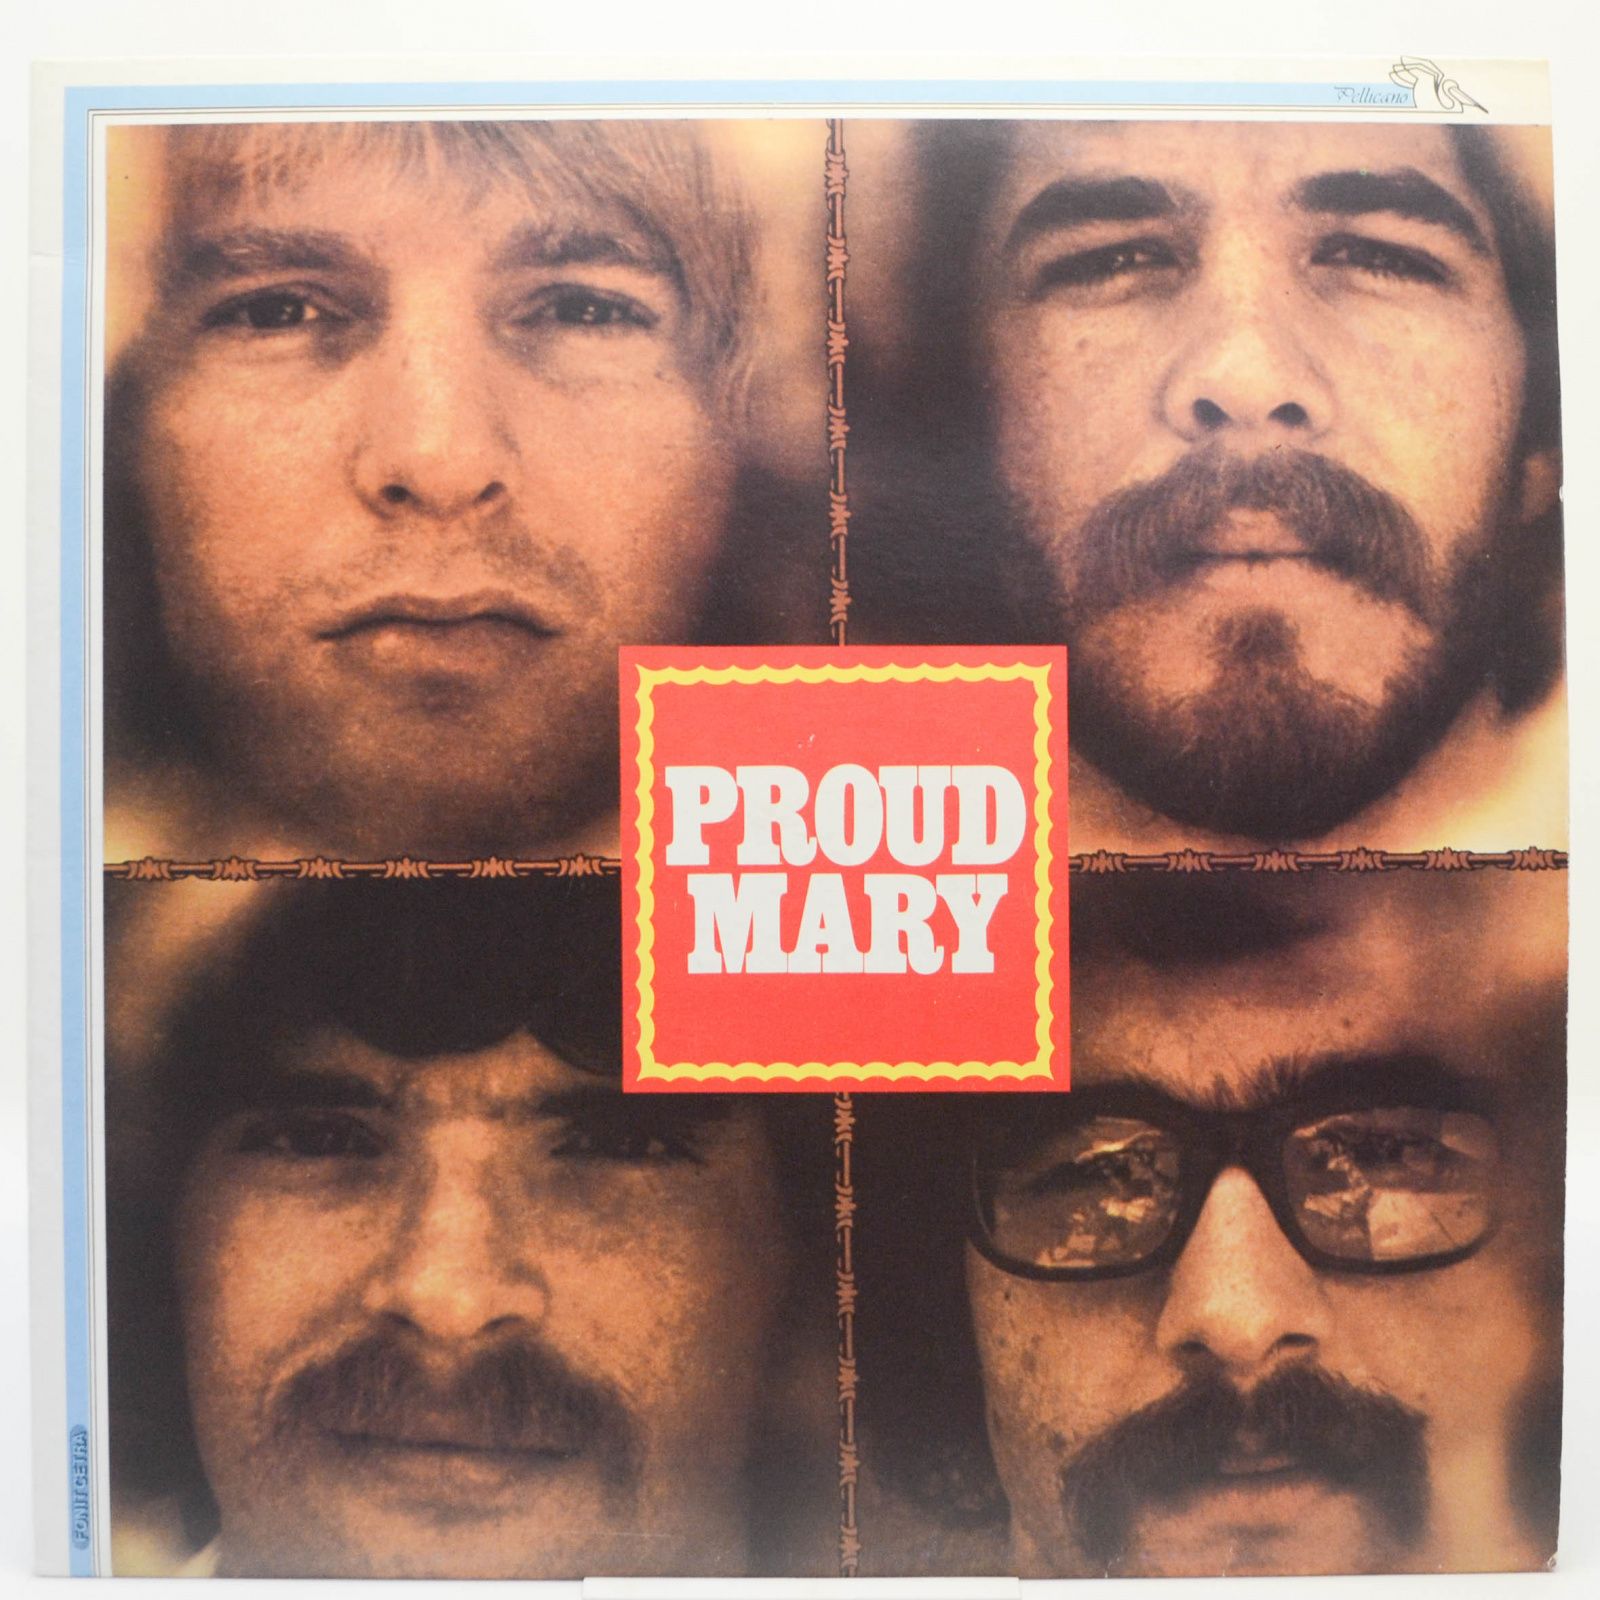 Creedence Clearwater Revival — Proud Mary, 1969